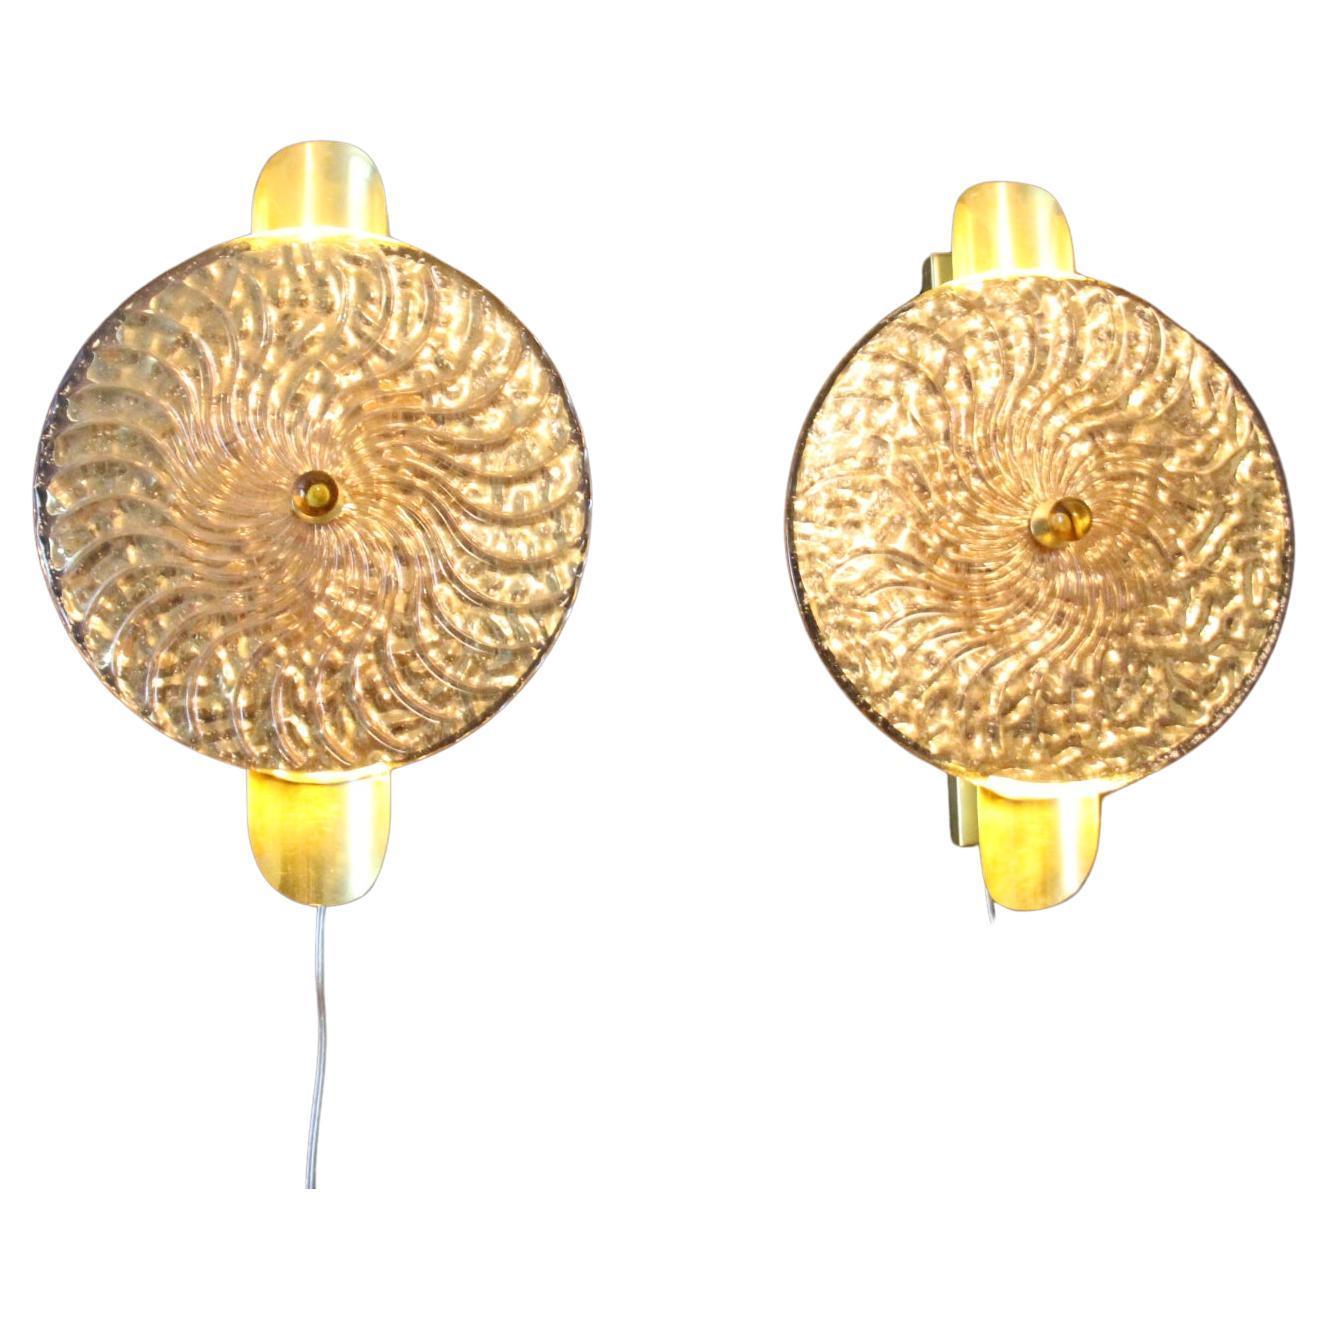 This striking pair of wall lamps is made of textured pink Murano glass disk worked like a spiral swirled, put on a textured brass plate to produce this exceptional effect of changing color between pink and gold . This work of art reaches a high